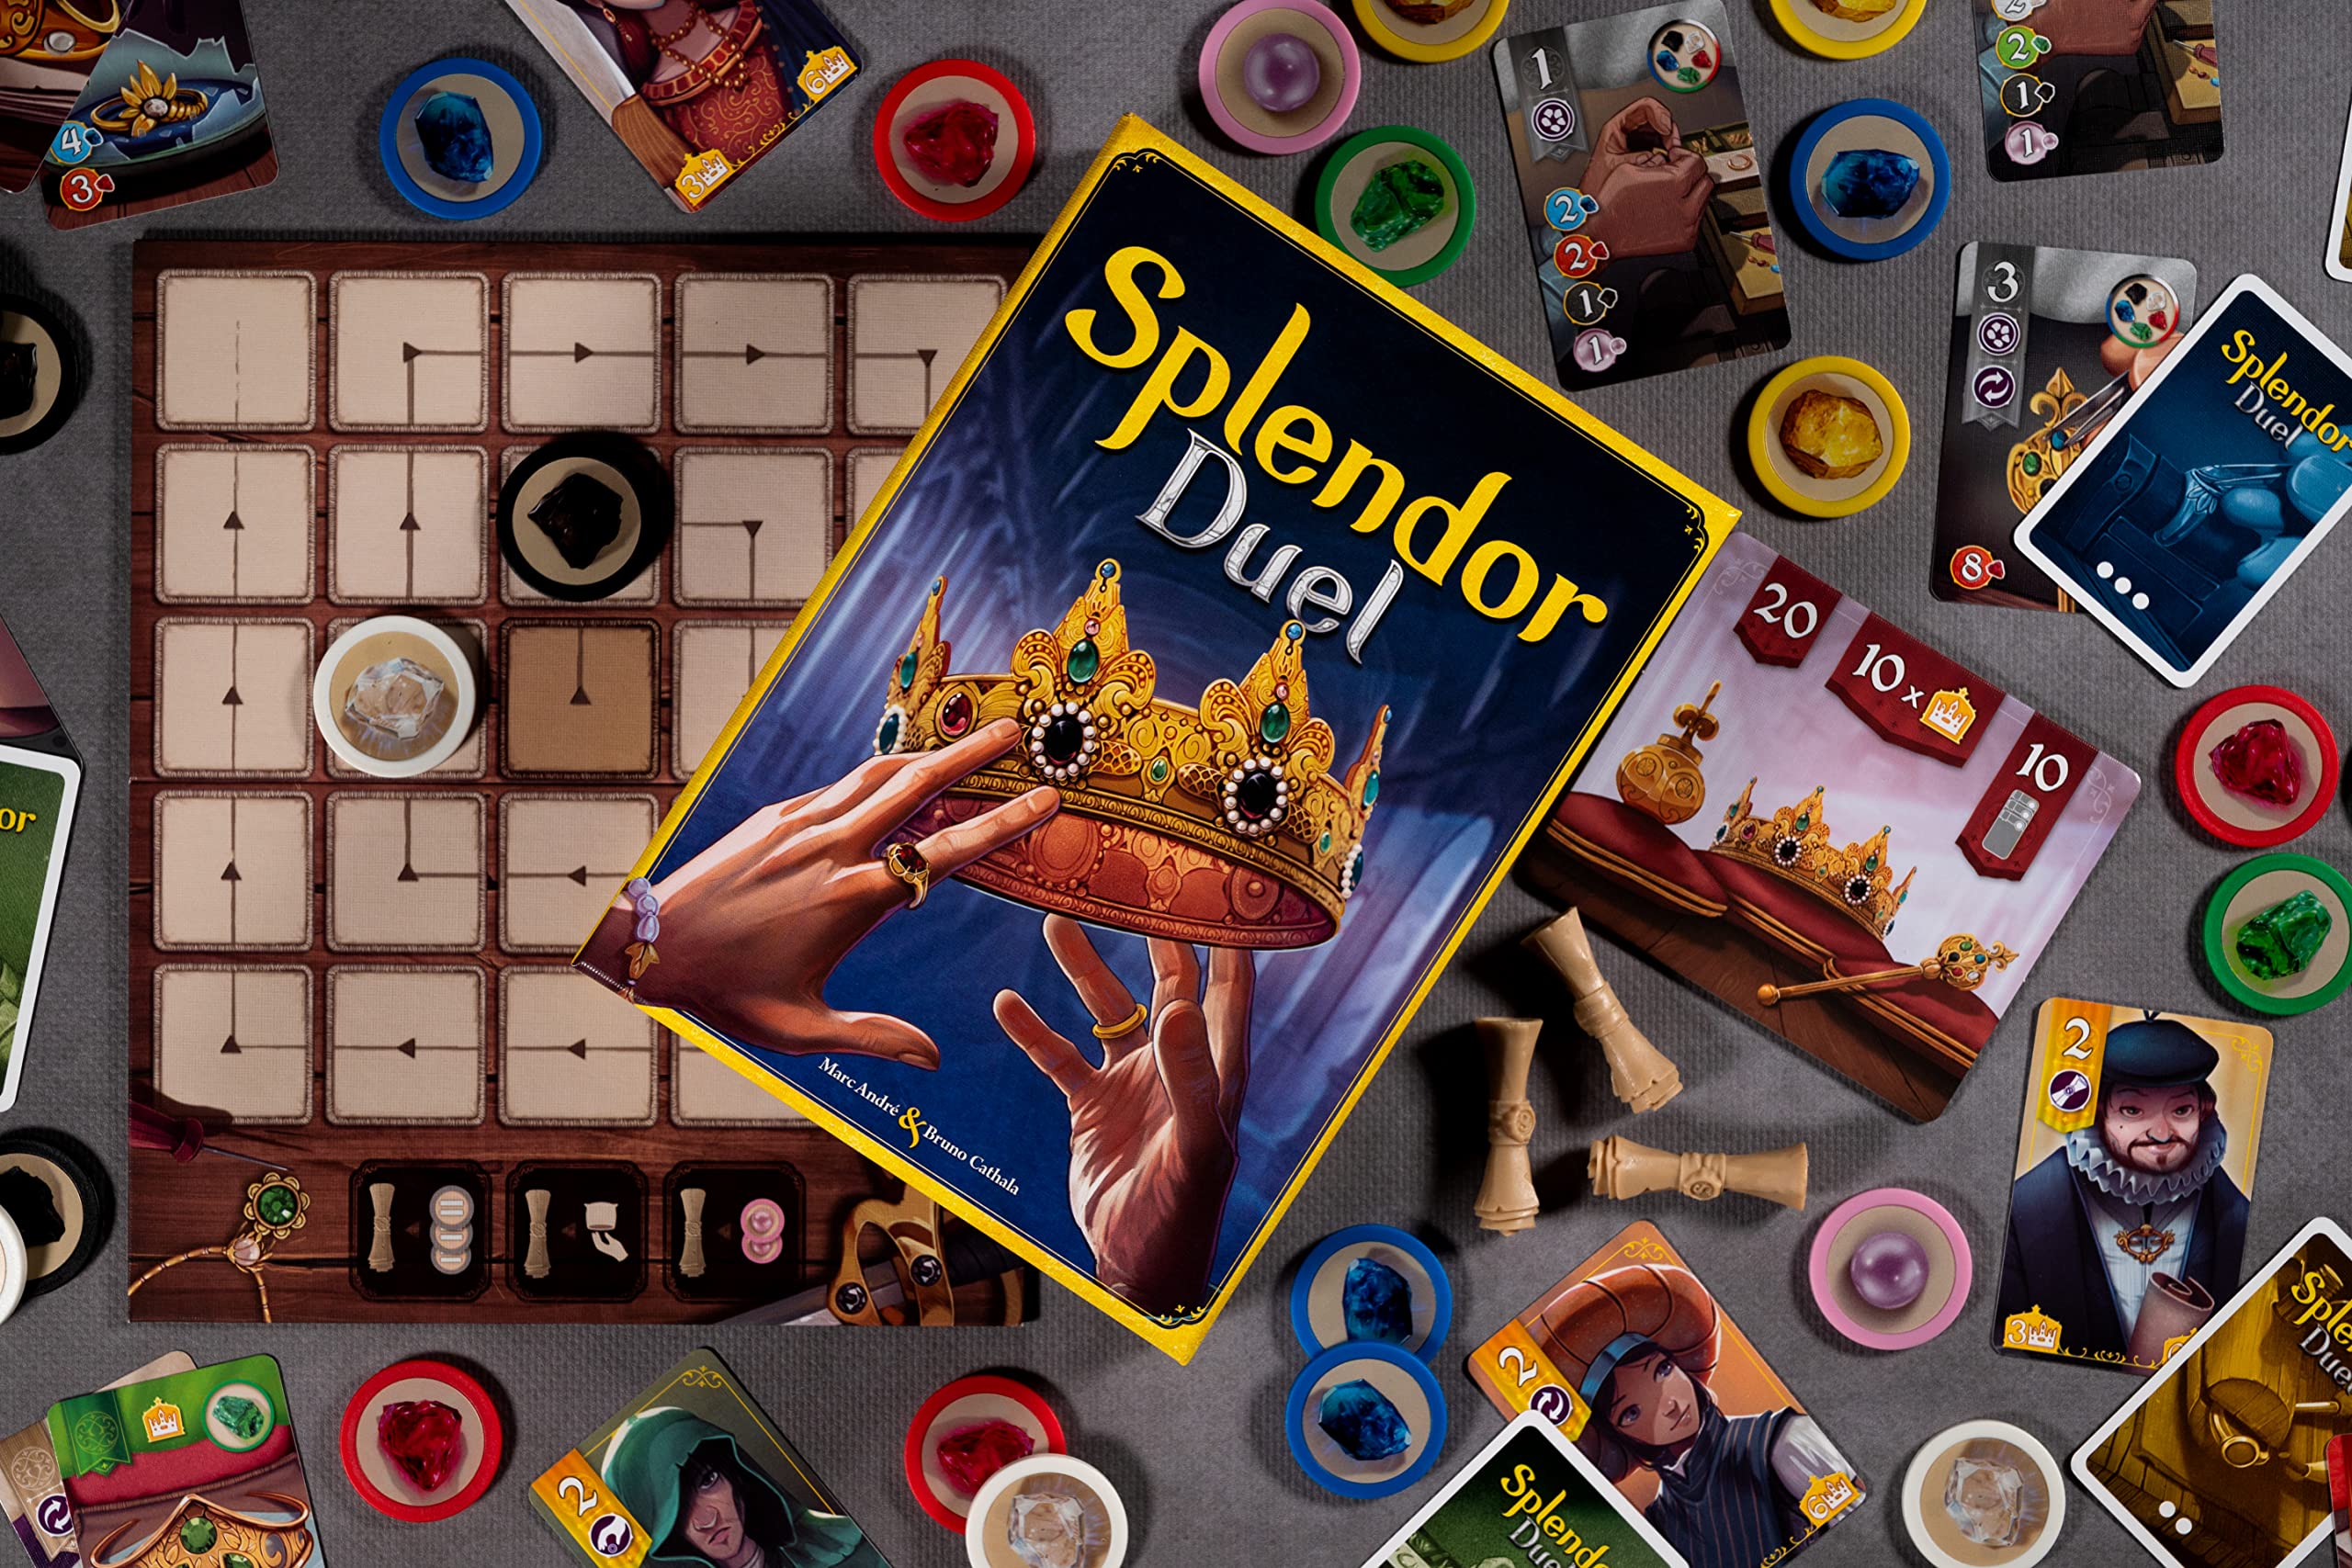 Splendor Duel Board Game - Strategy Game for Kids and Adults, Fun Family Game Night Entertainment, Ages 10+, 2 Players, 30-Minute Playtime, Made by Space Cowboys